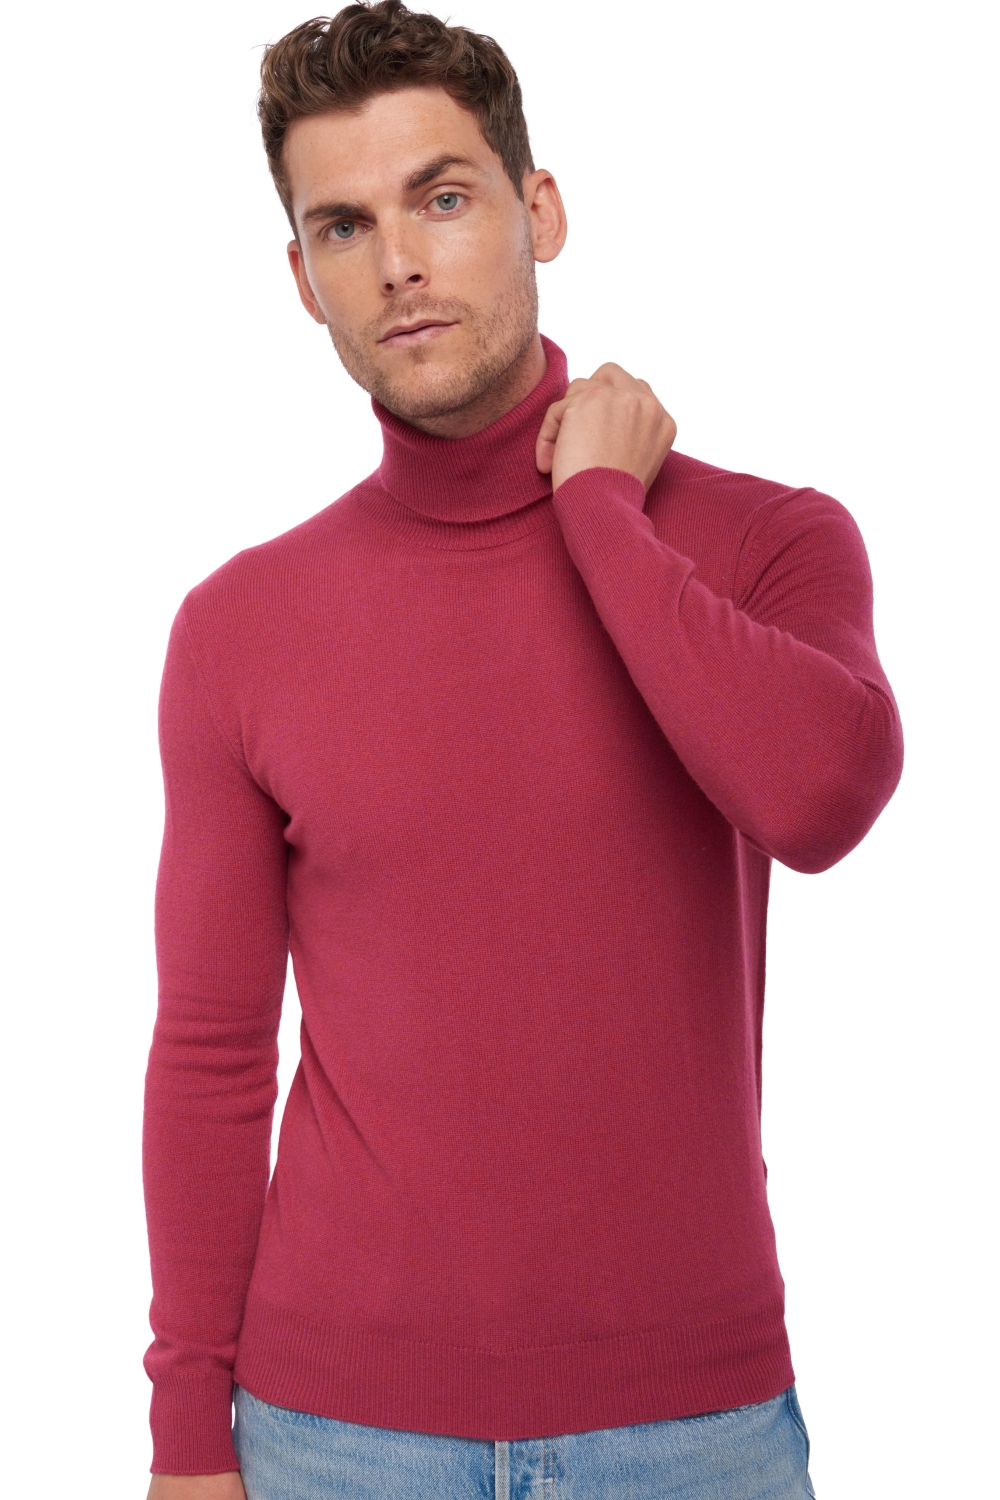 Cashmere men basic sweaters at low prices tarry first highland s